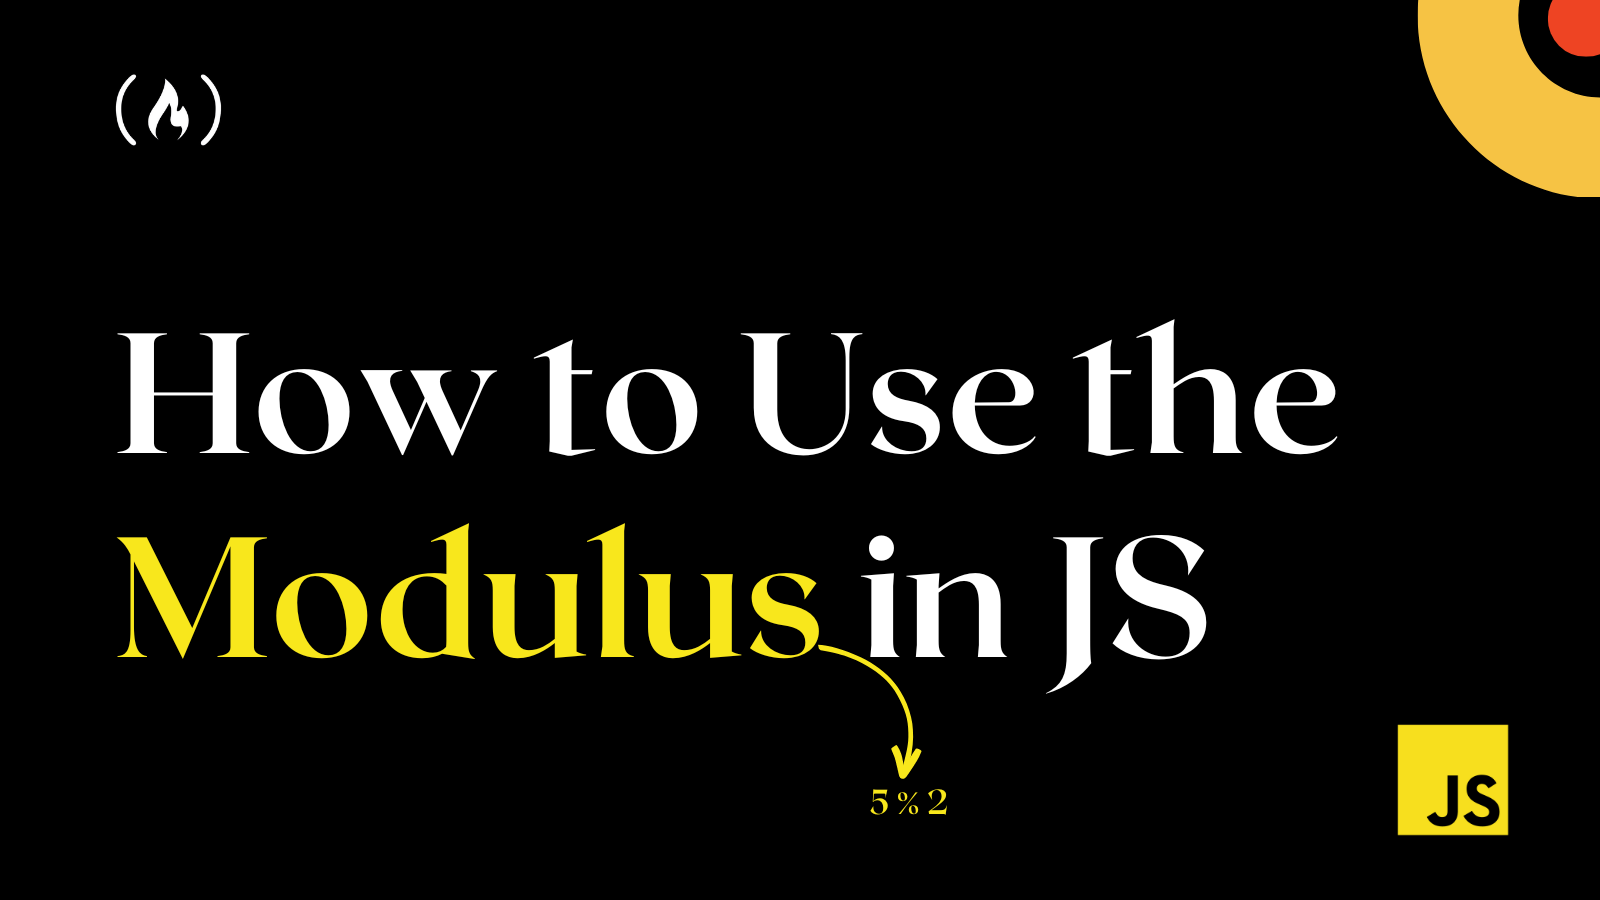 JavaScript Modulo Operator – How to Use the Modulus in JS